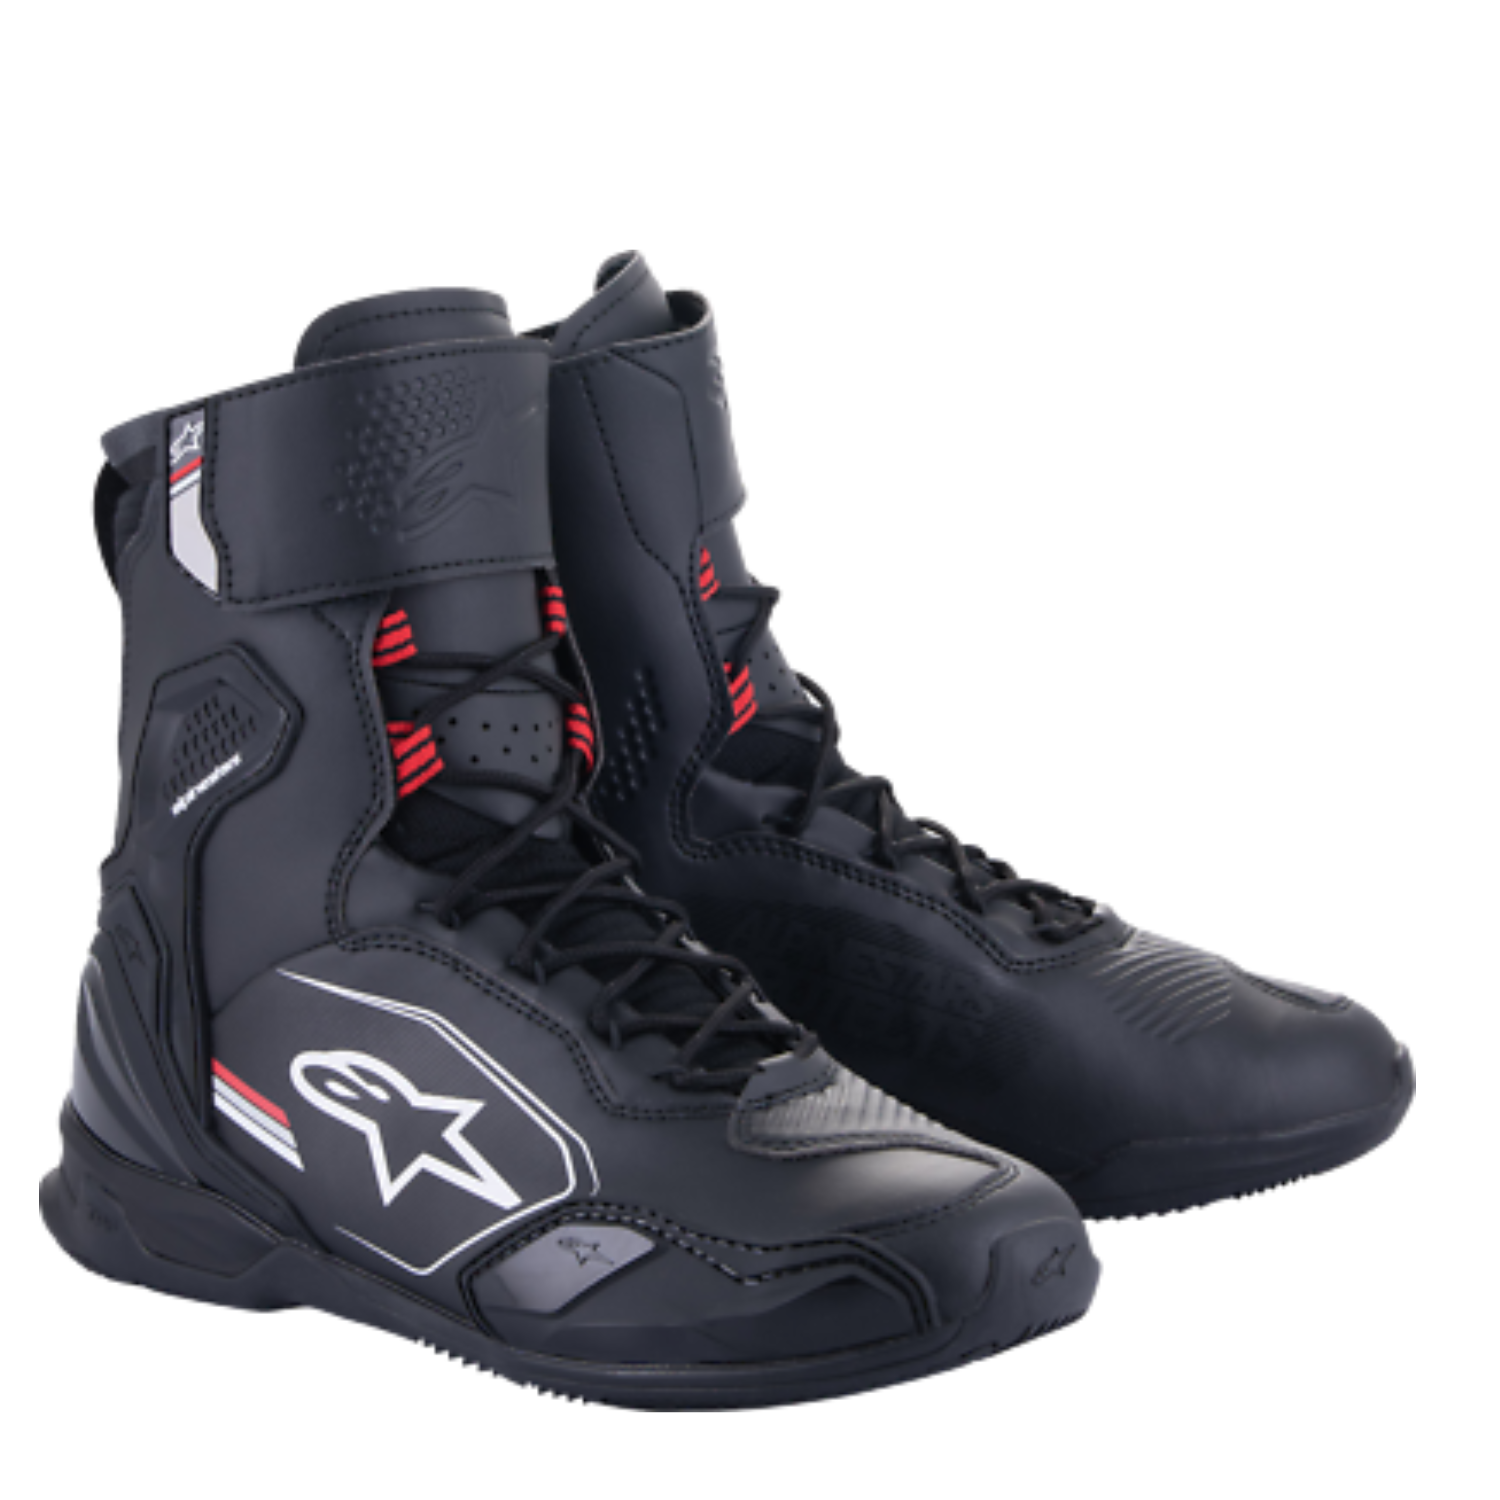 Image of Alpinestars Superfaster Shoes Black Gray Bright Red Size US 9 EN